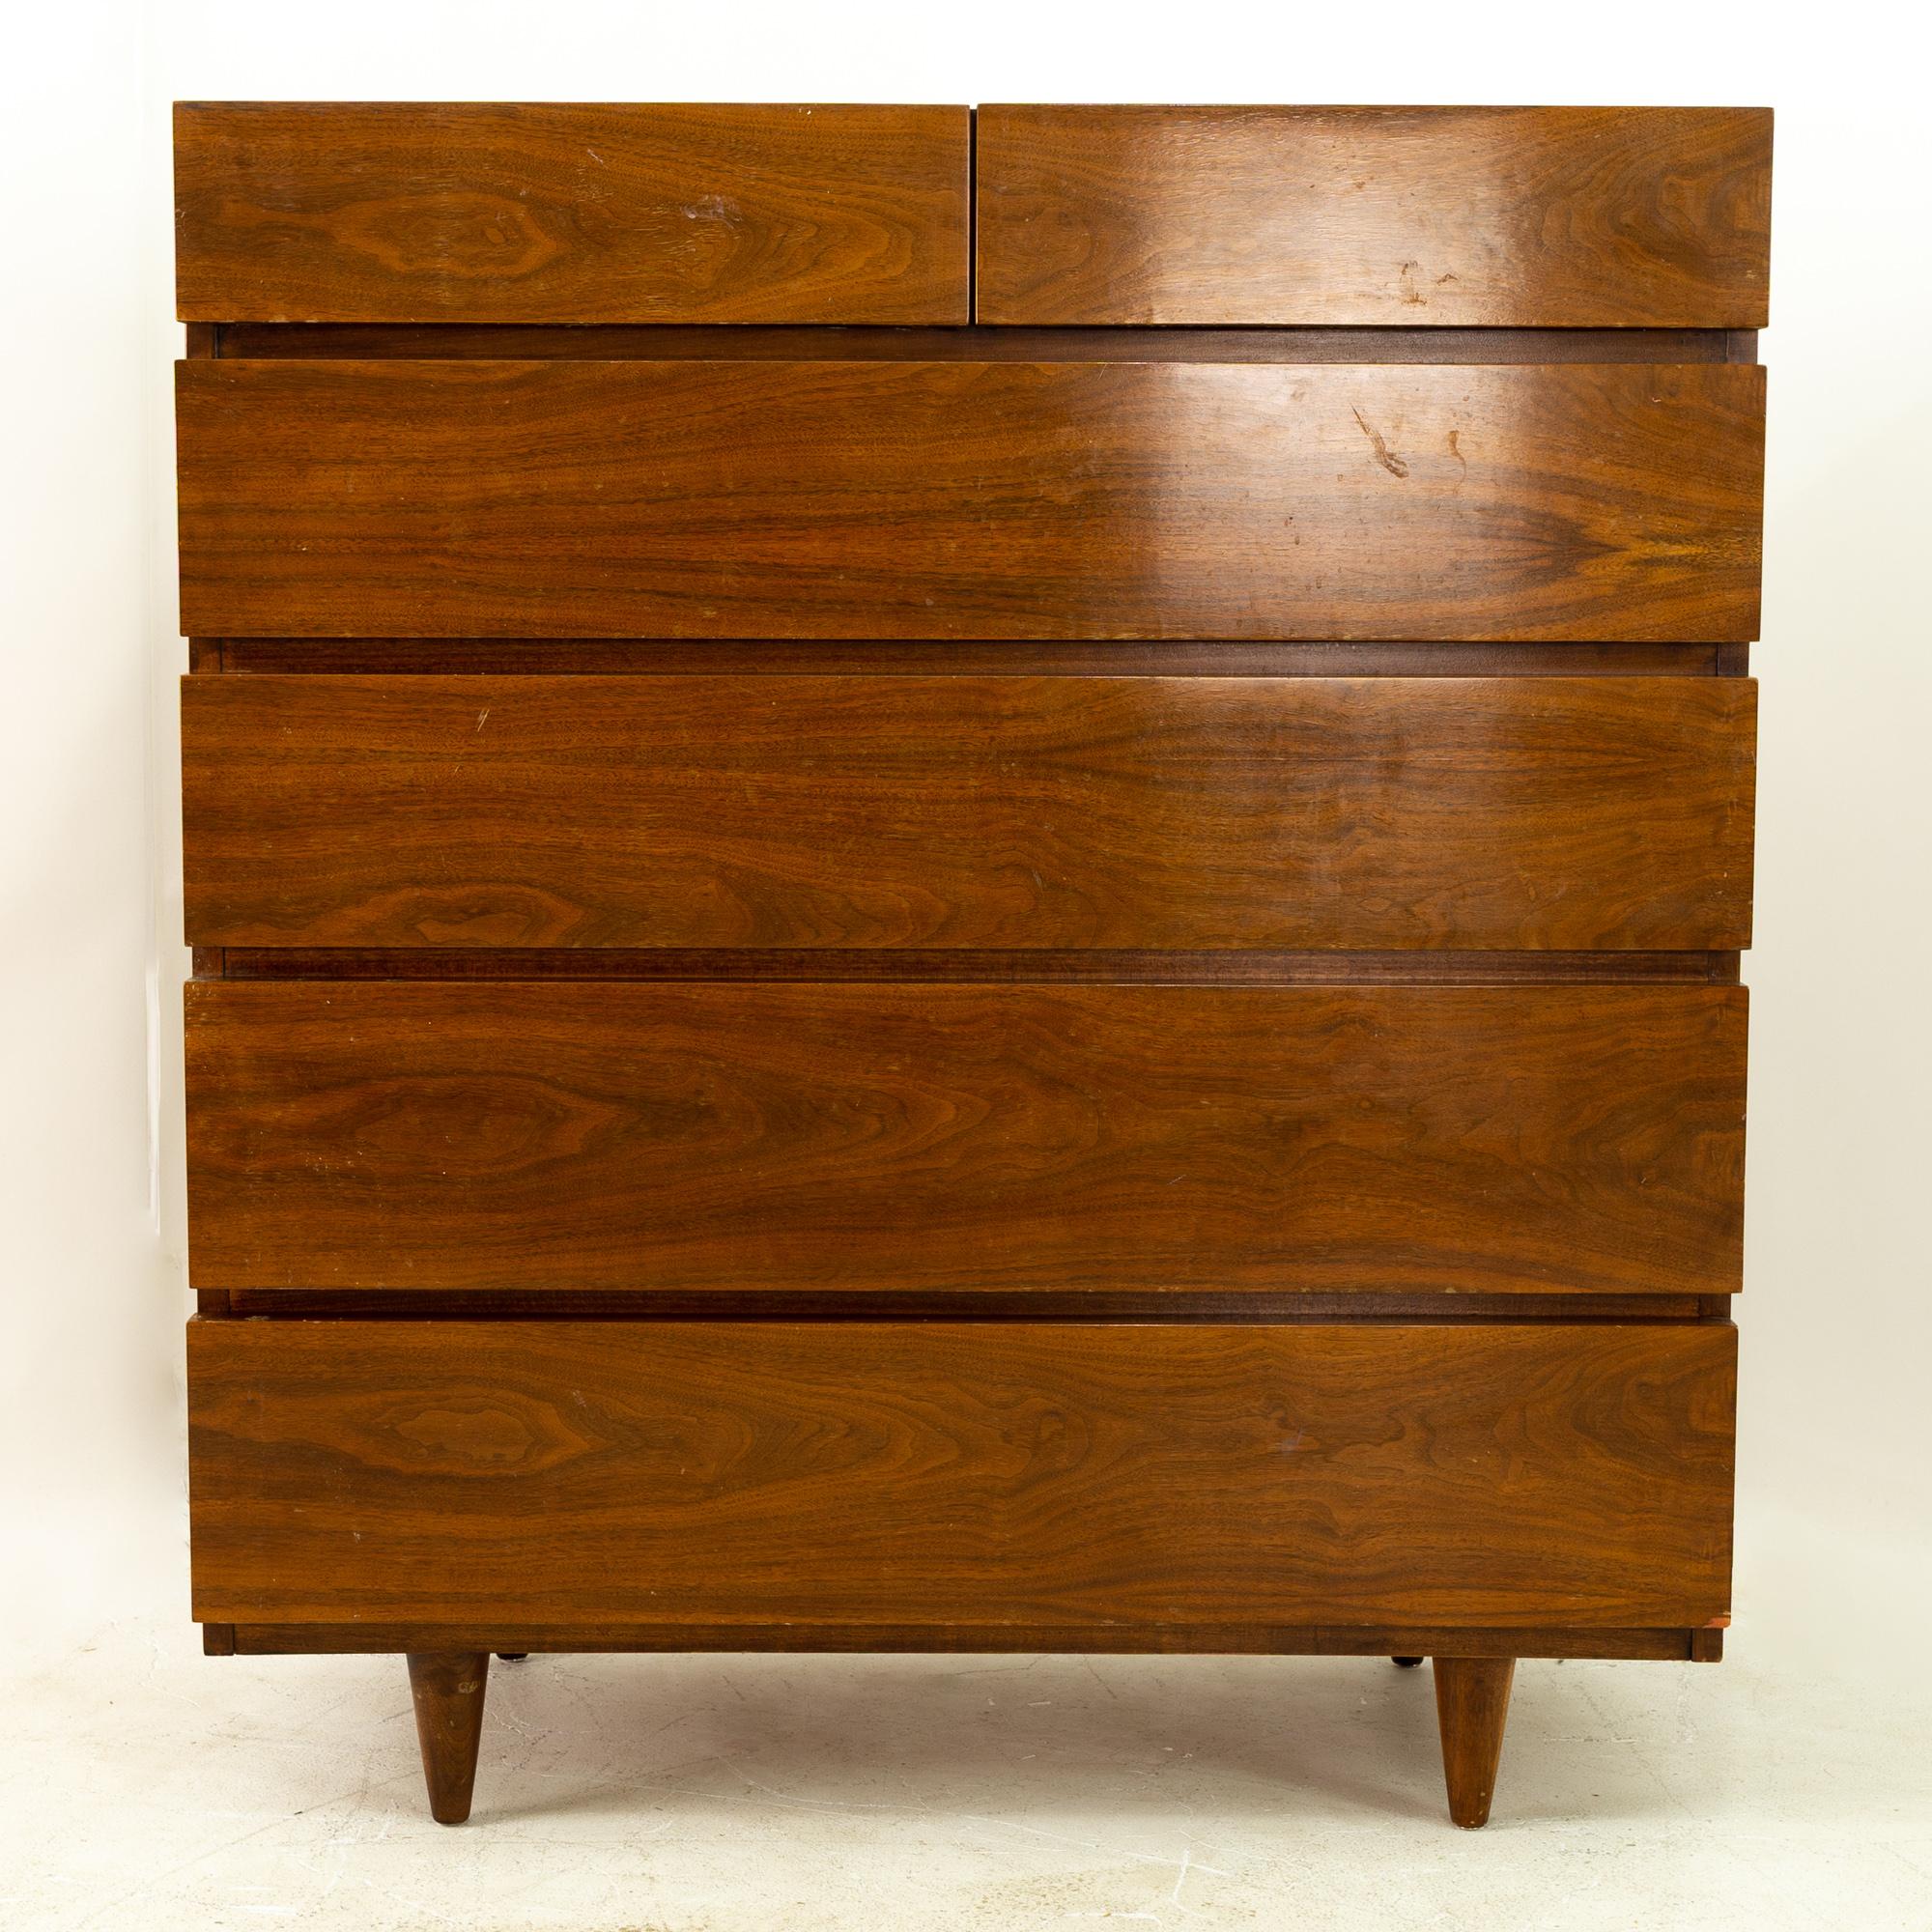 American of Martinsville Mid Century walnut 6-drawer highboy dresser
Measures: 40 wide x 19.5 deep x 45.25 high
See below for 5 ways to save!
Free restoration: When you purchase a piece we carefully clean and prepare it for shipping. If during